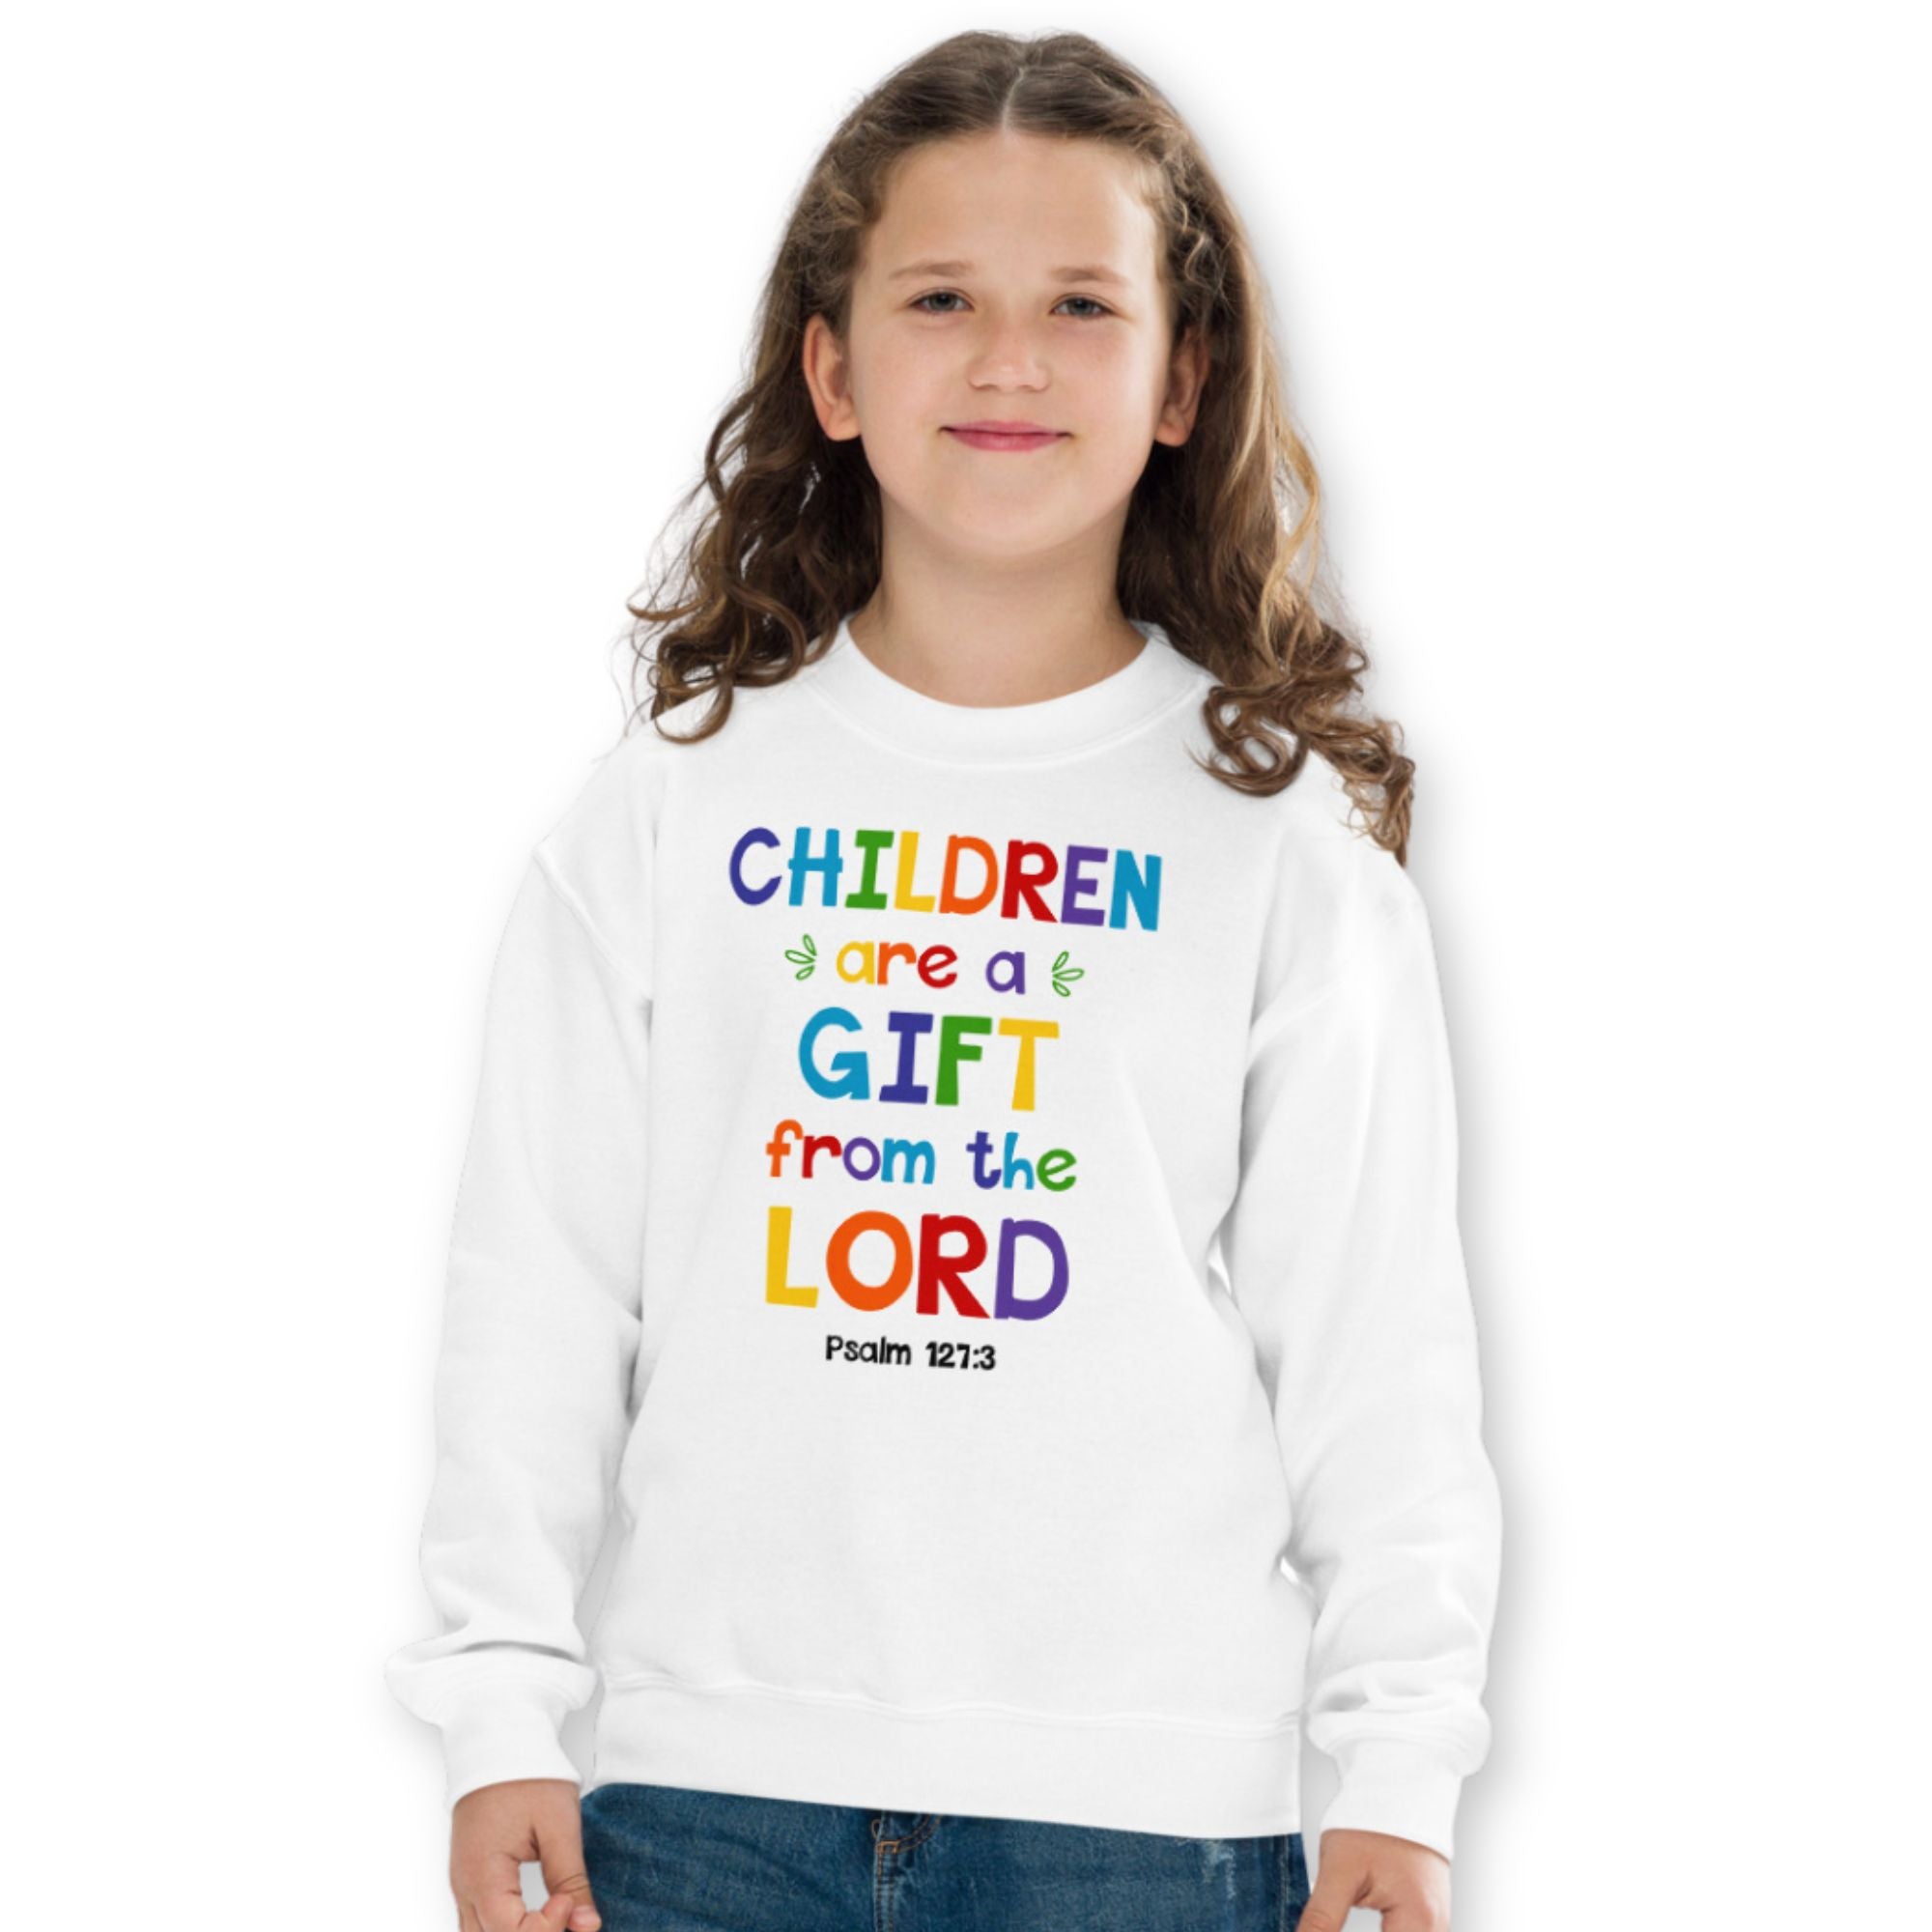 Children are a Gift Youth Crewneck Sweatshirt Color: White Size: XS Jesus Passion Apparel